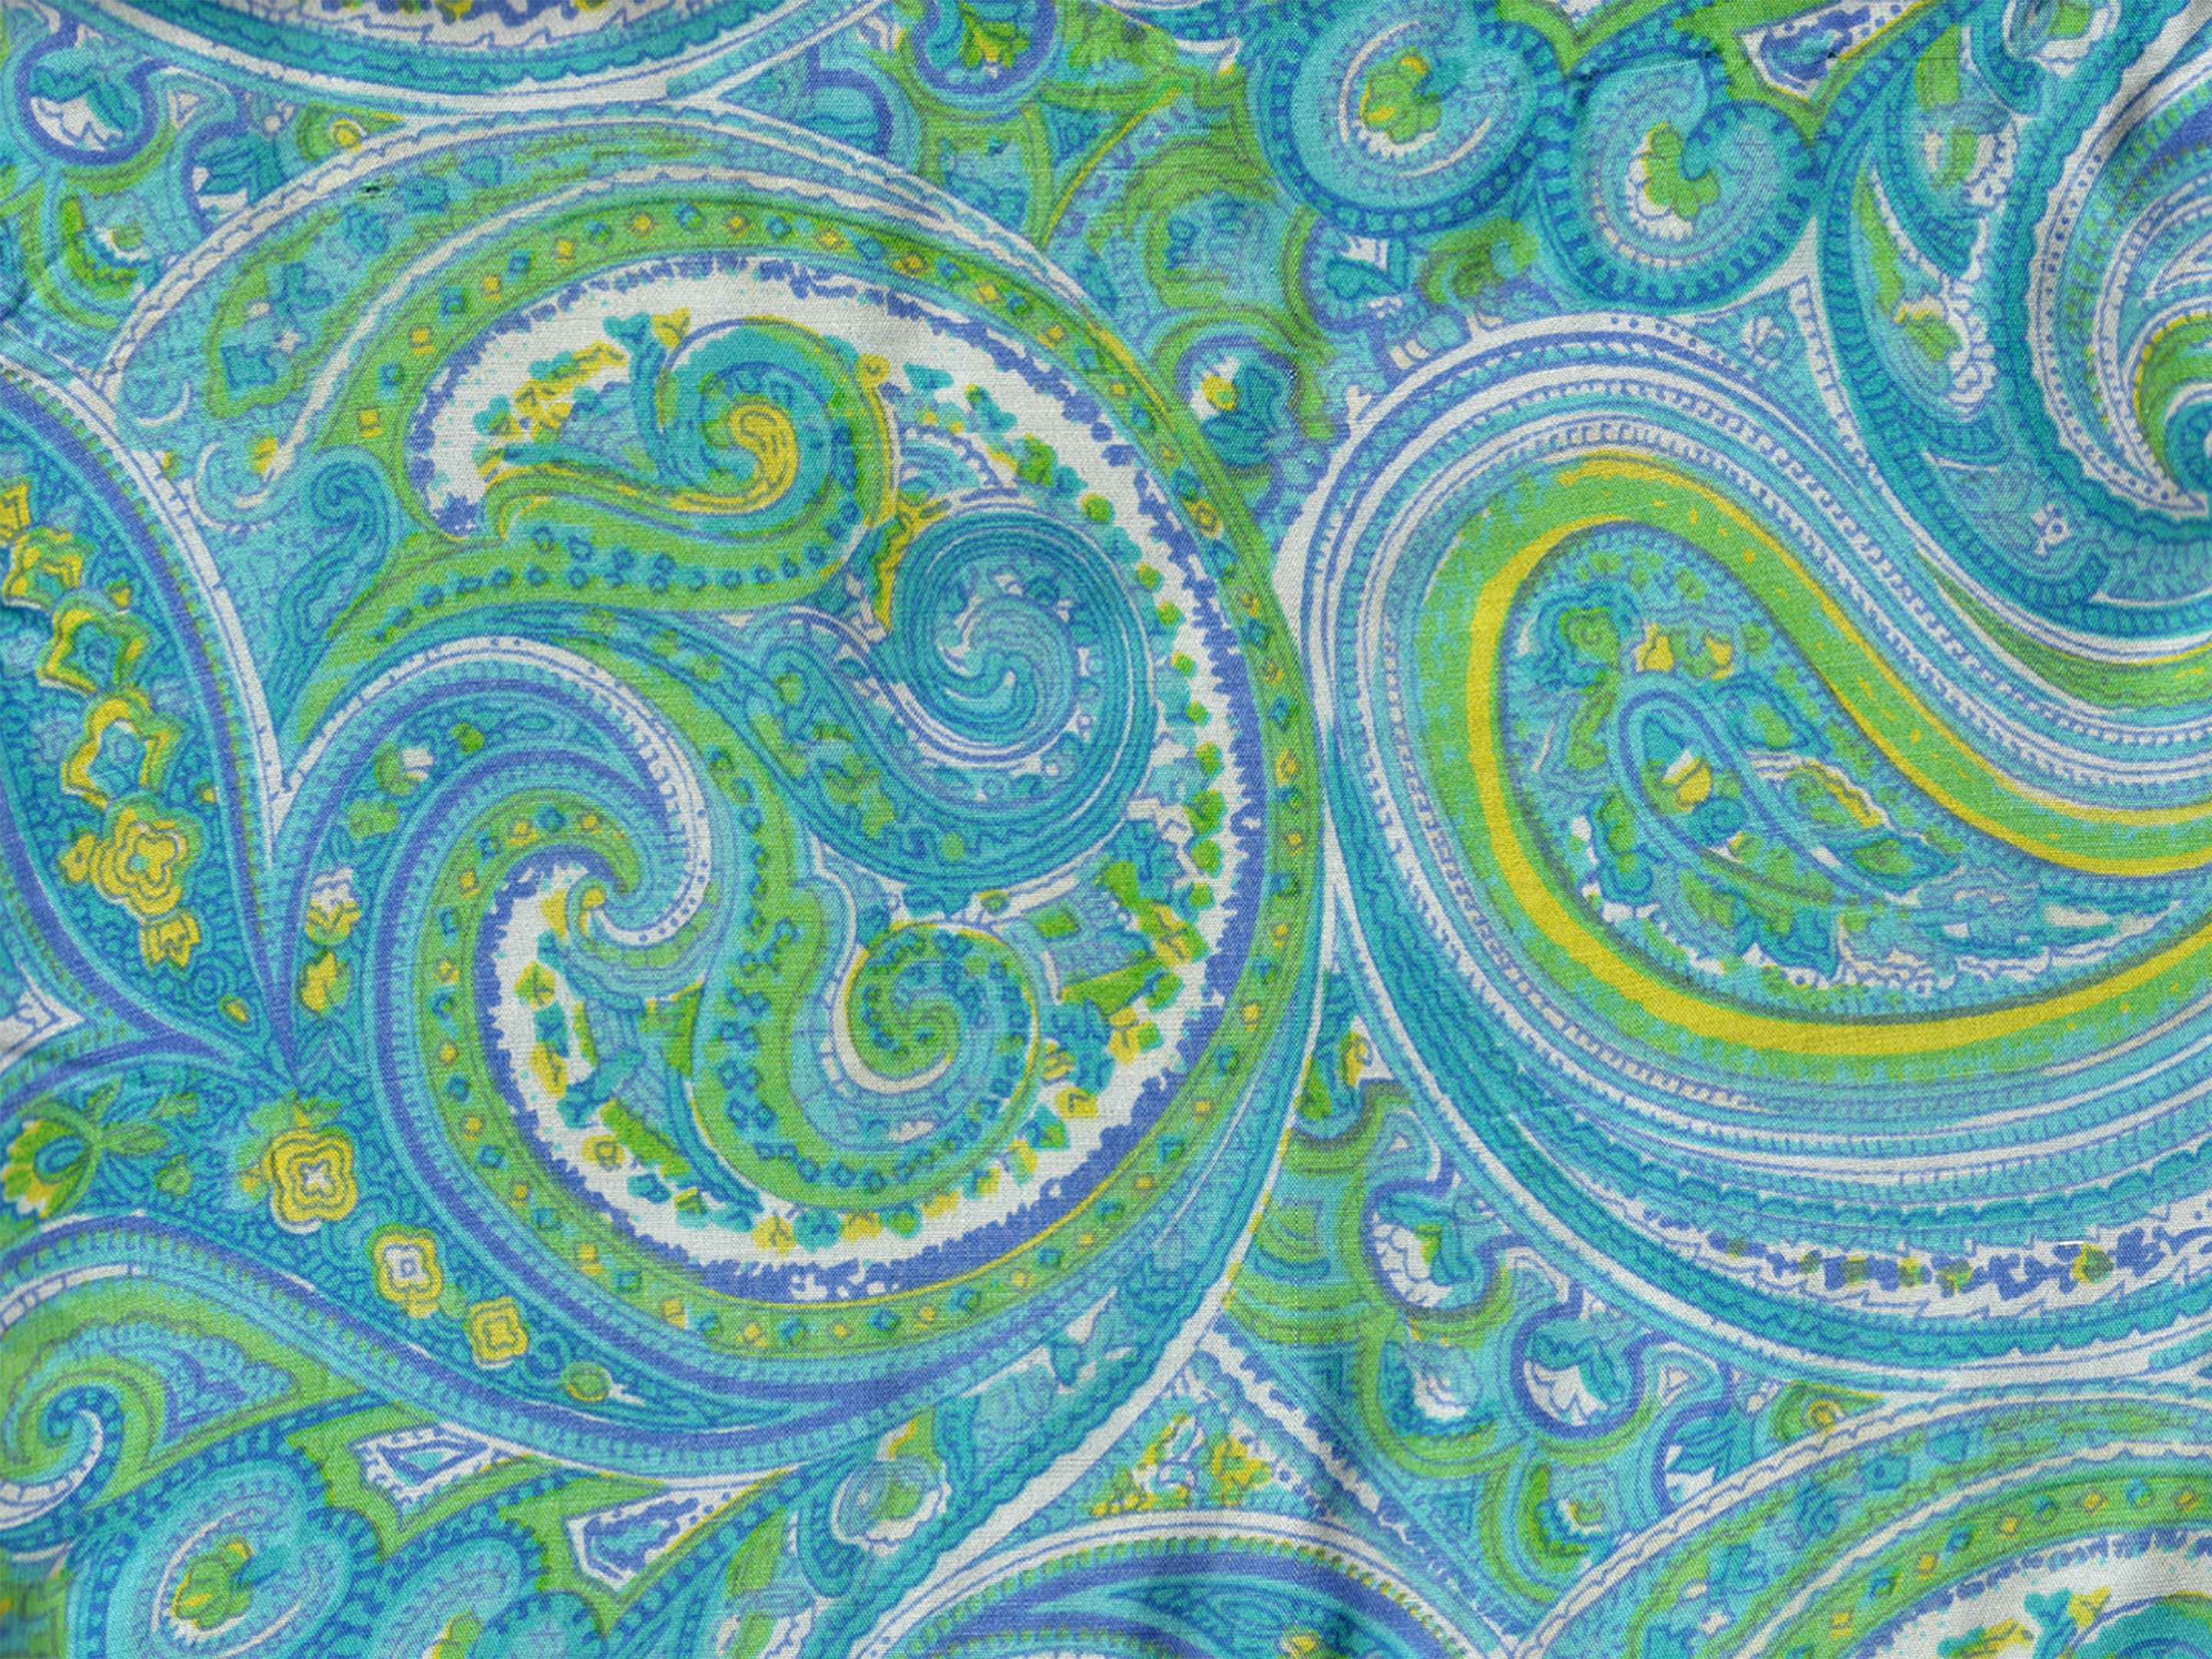 Still from Persian Pickles: Blue and green paisley pattern